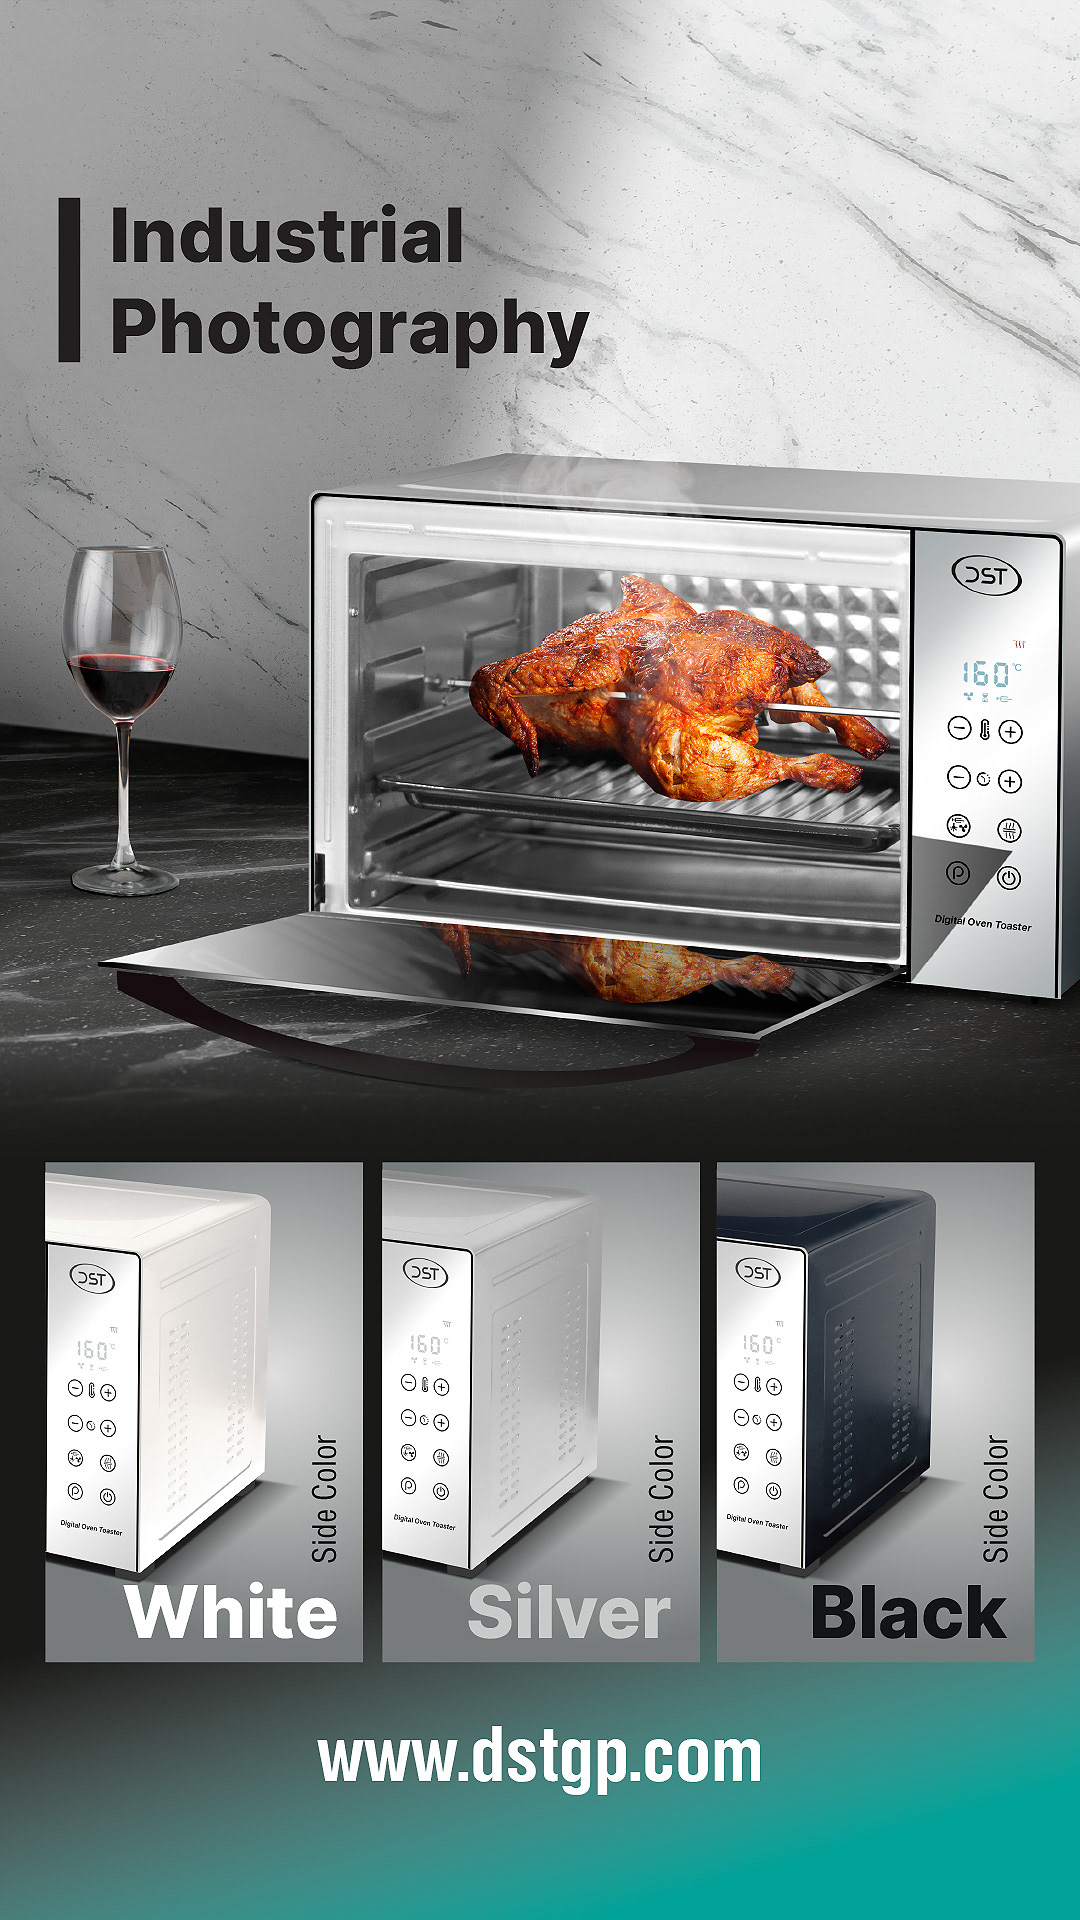 oven Cooktop appliances Social media post brand identity Advertising  electric hob